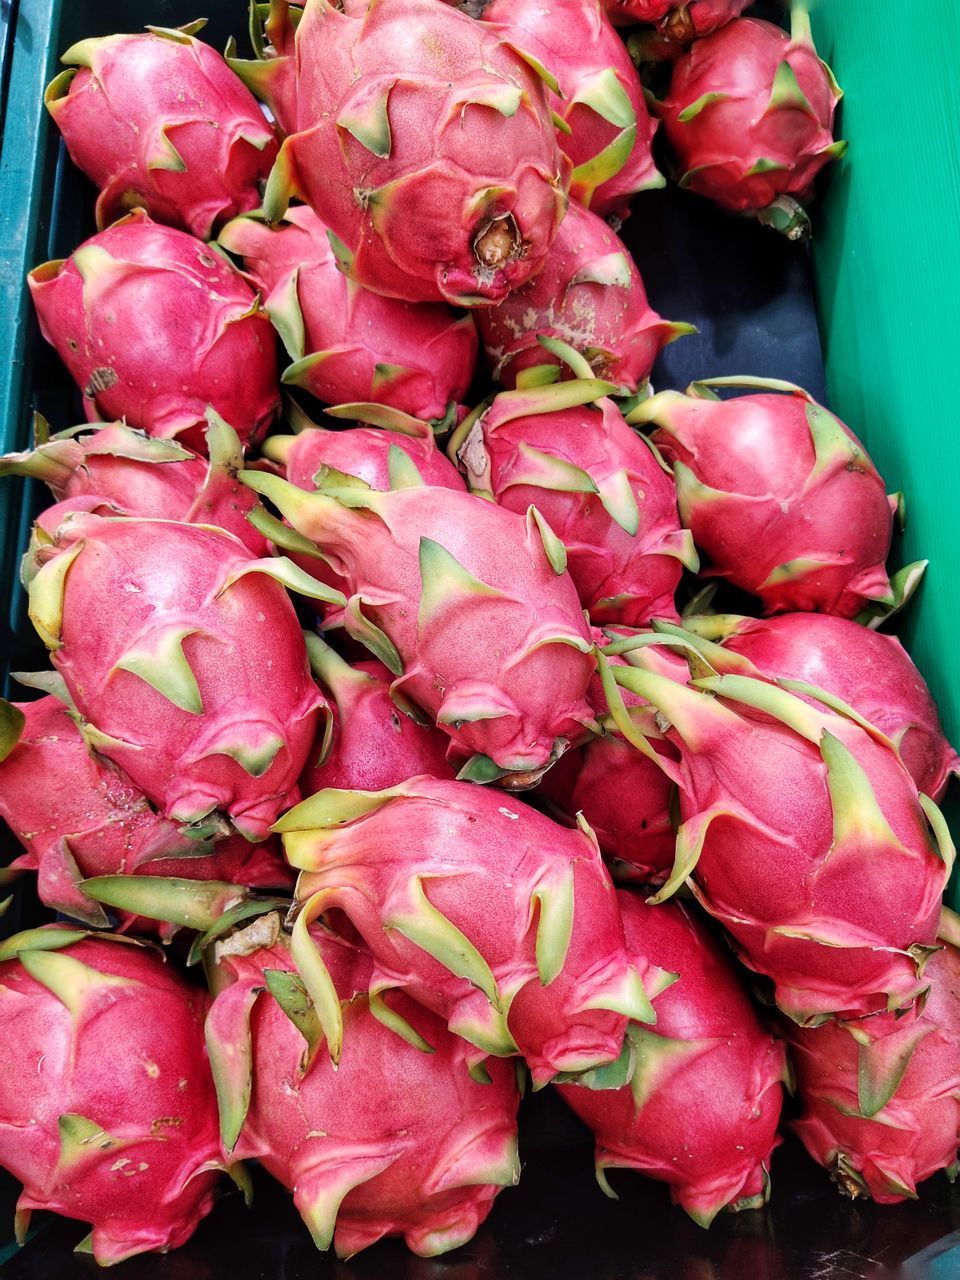 CLOSE-UP OF PINK FLOWERS FOR SALE